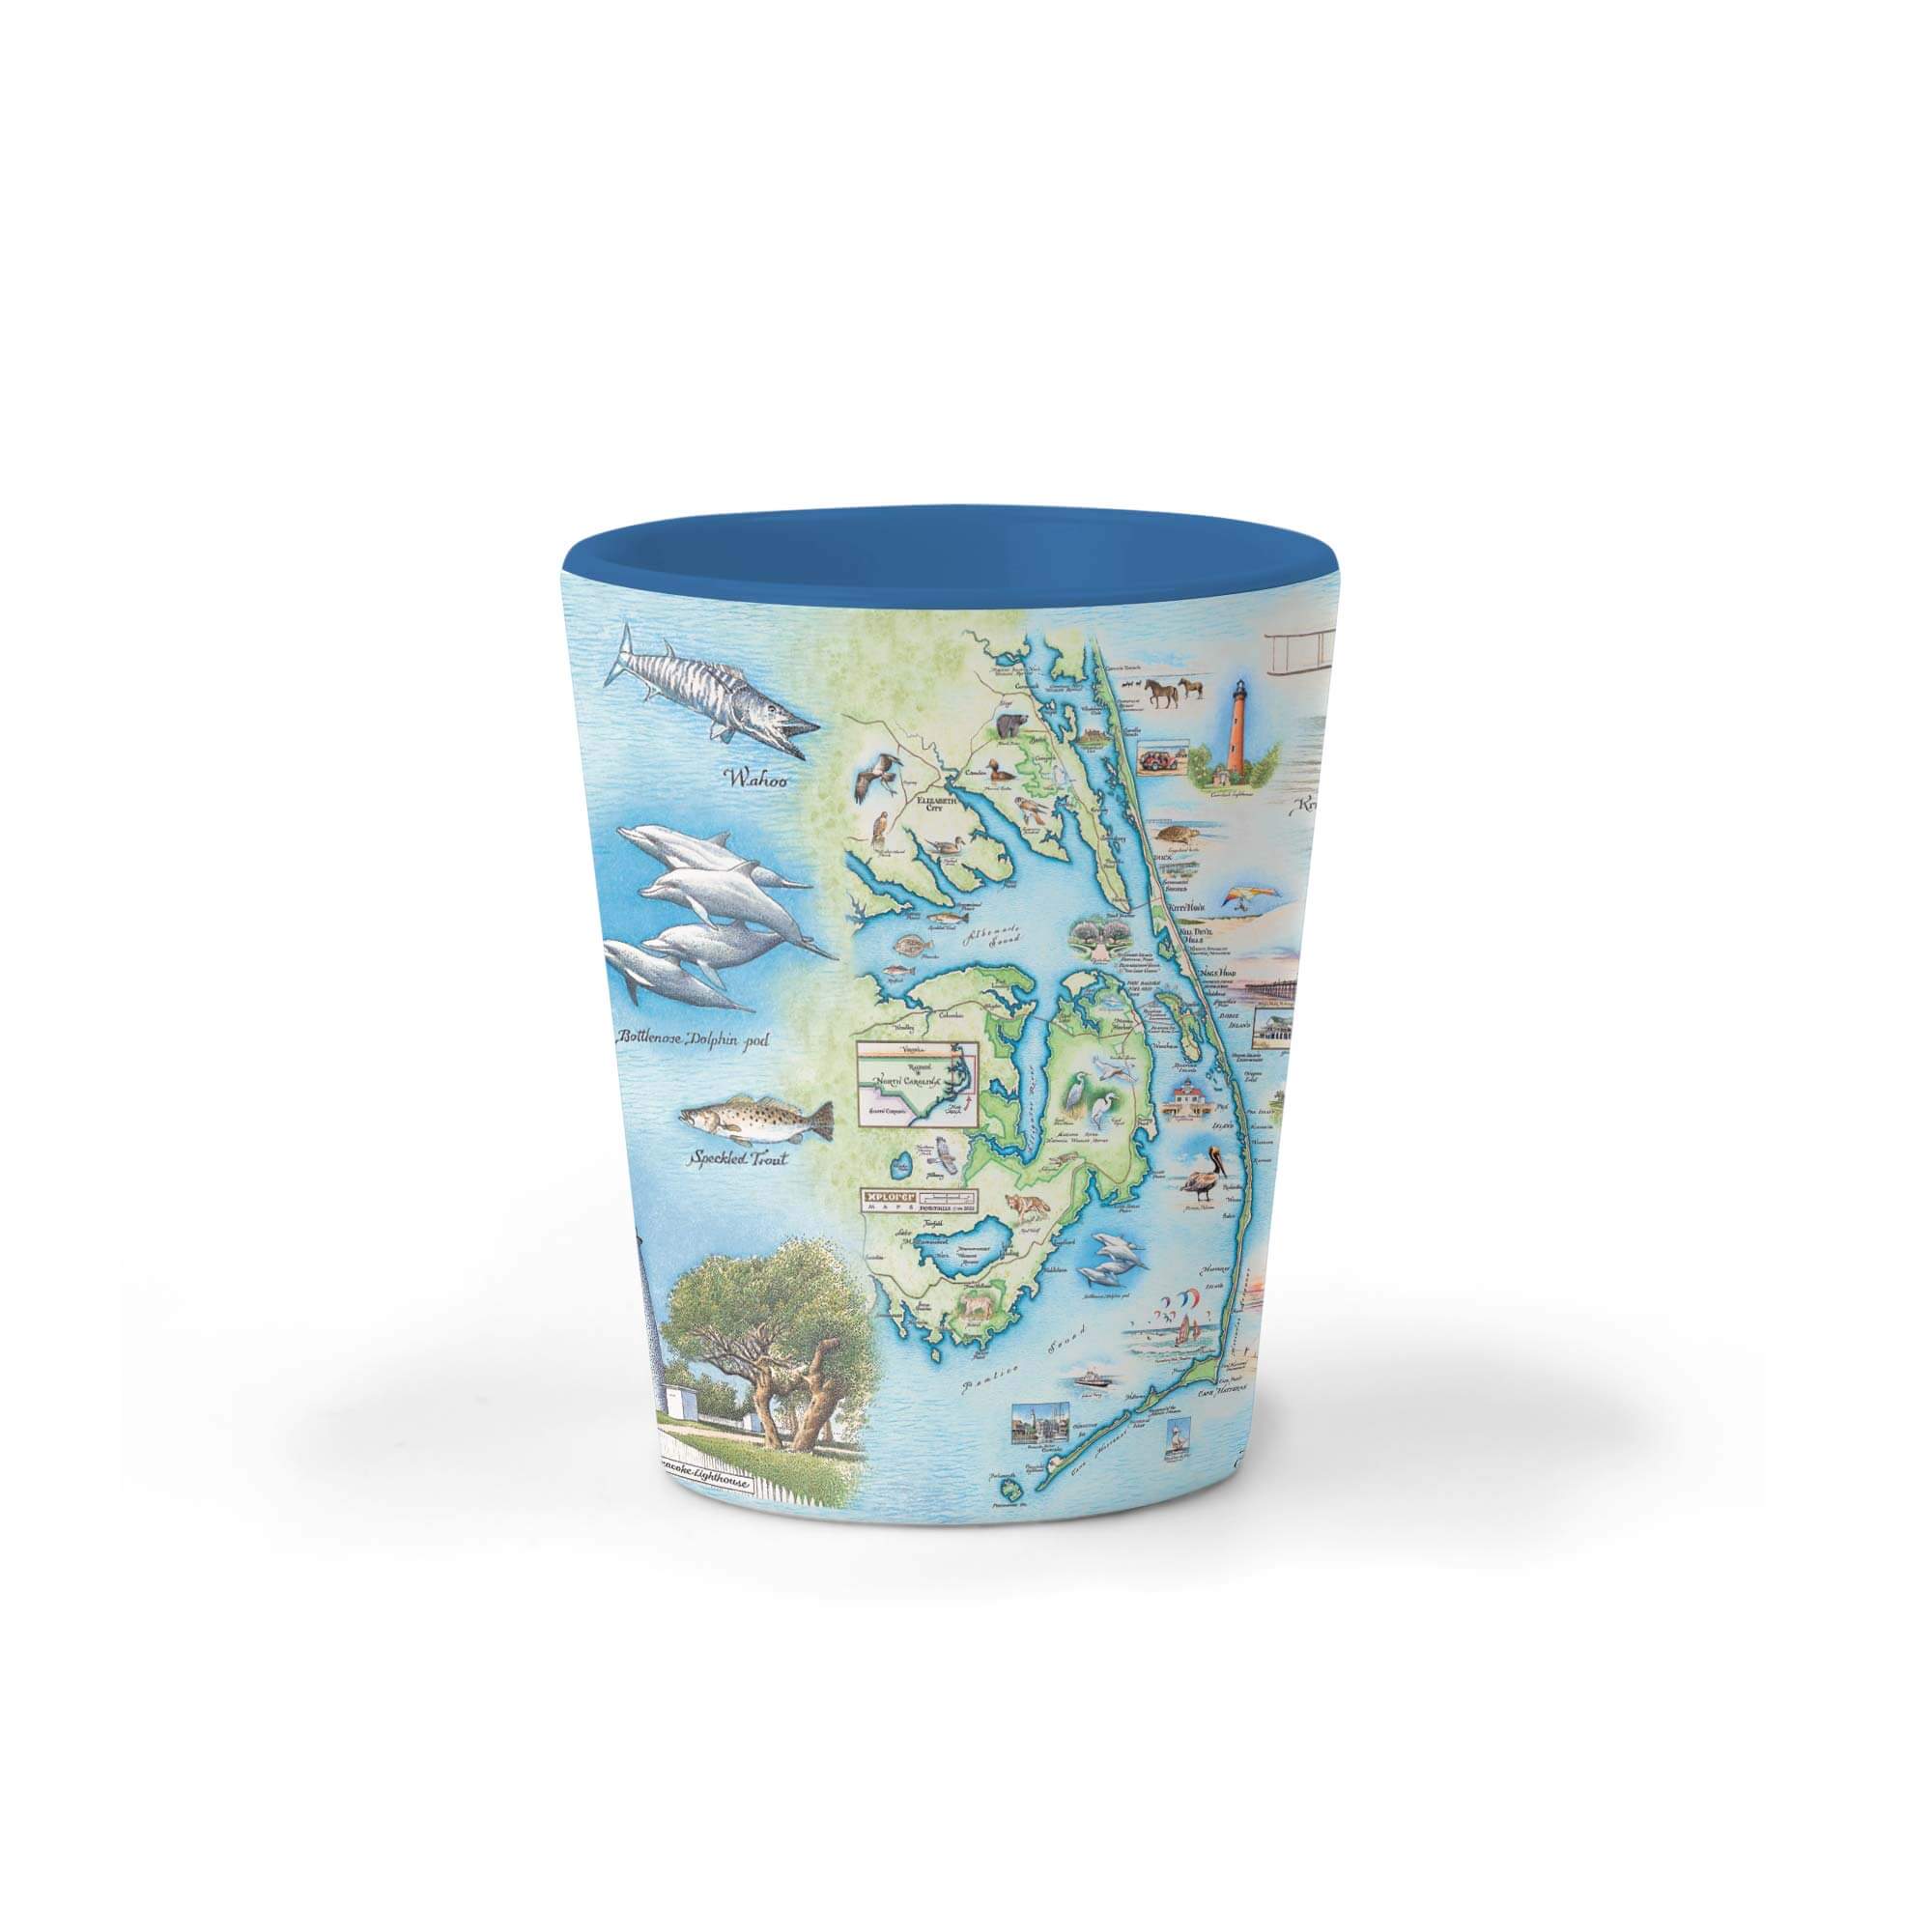 Cheers to the coastal charm of the Outer Banks with this 1.5 oz blue shot glass. Featuring serene beach scenes, iconic lighthouses, and vibrant marine life, it's the perfect way to capture memories of your beach adventures in North Carolina.